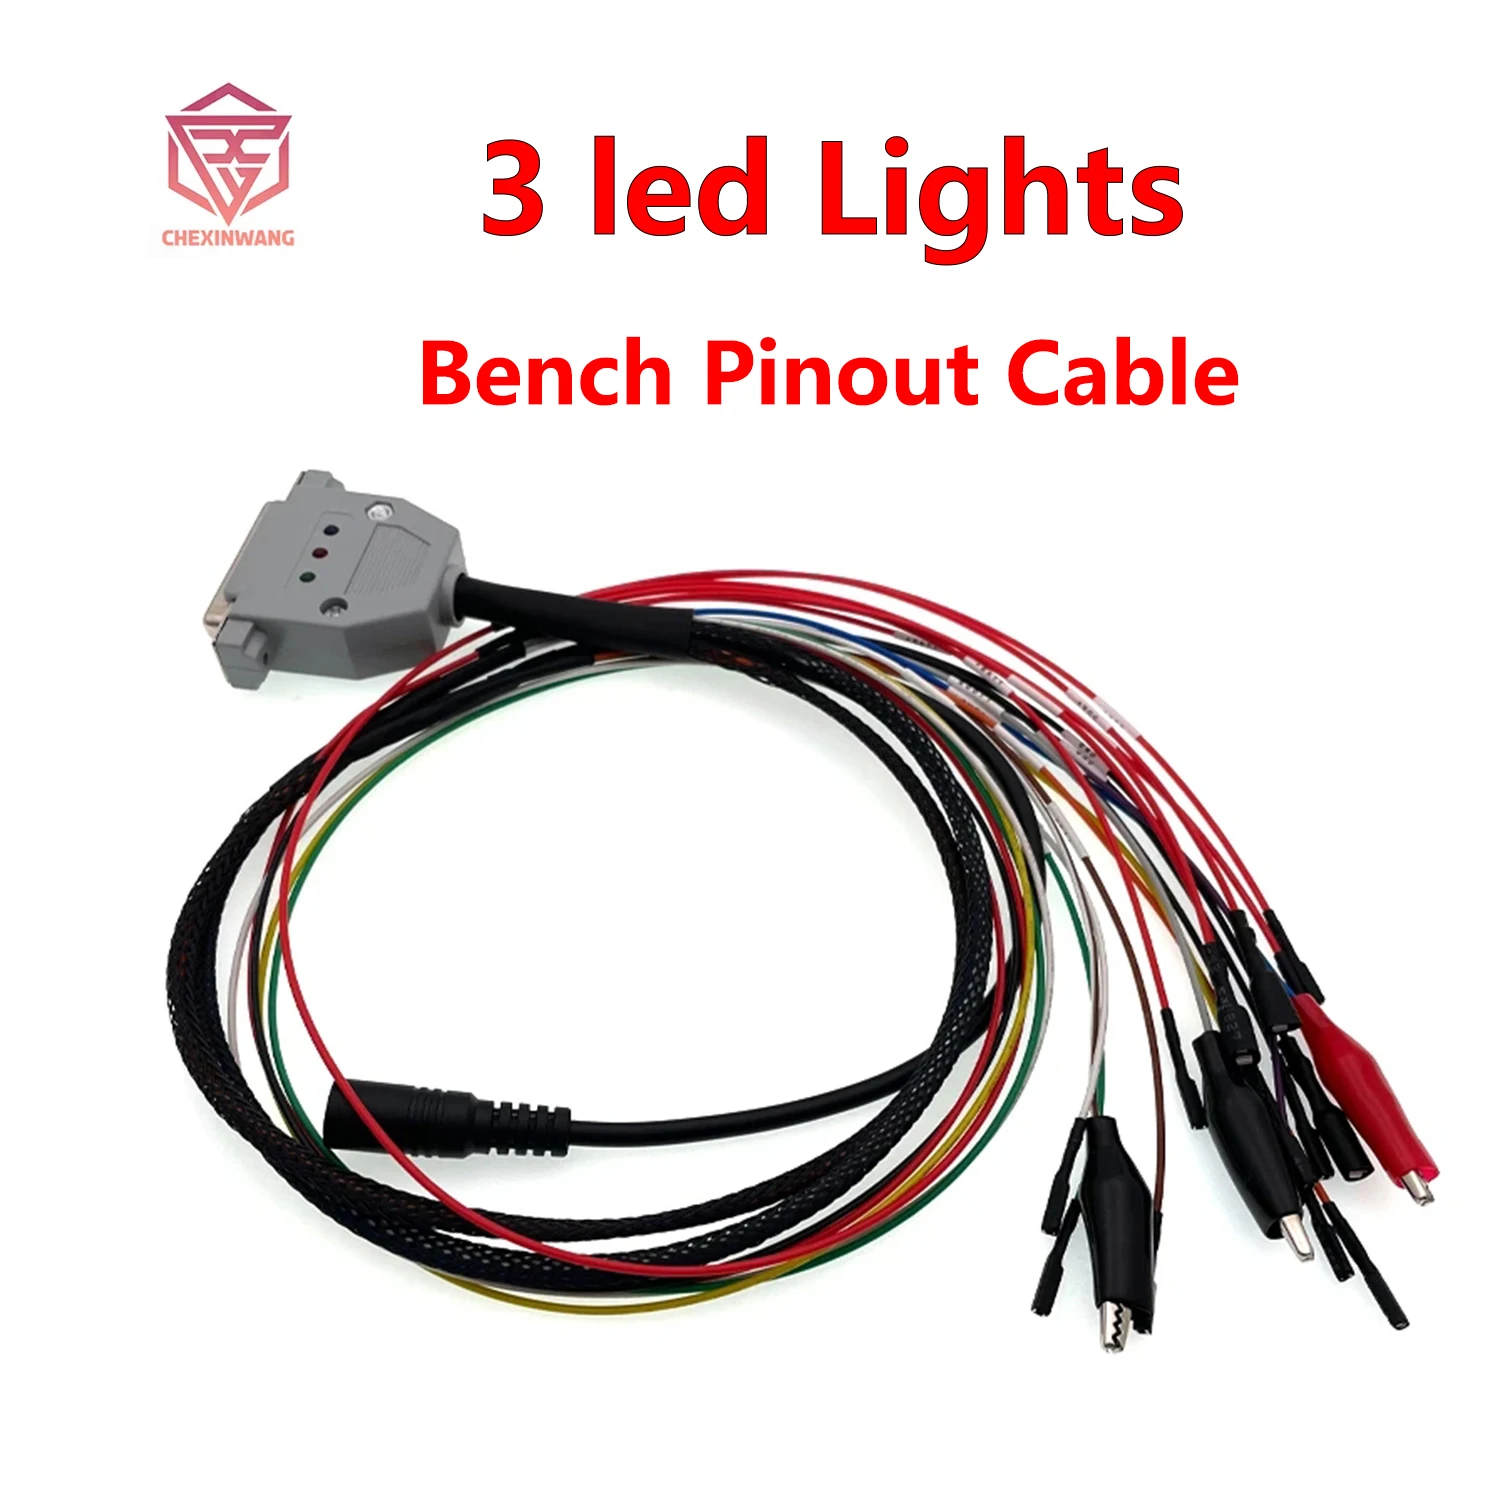 

Old Bench Pinout Cable For ITCARDIAG Sm2 Pro Pro+ j2534 VCI With 3LED Lights DB25 Cable Read&Write ECU BATT VCC CAN KLINE